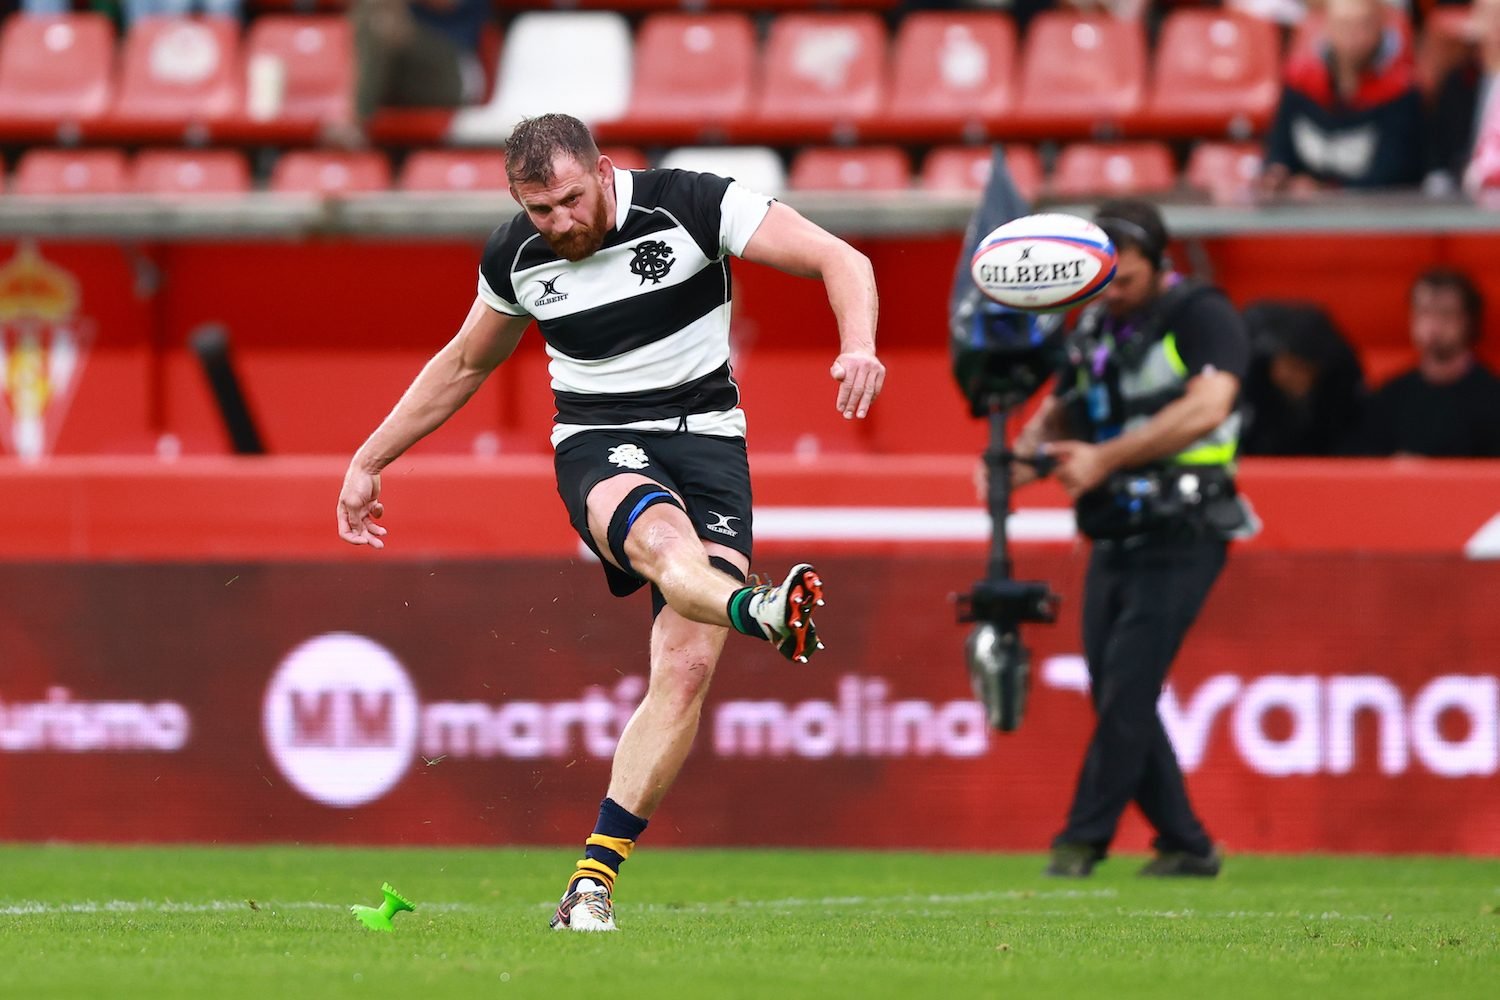 Tom Wood plays for the Barbarians